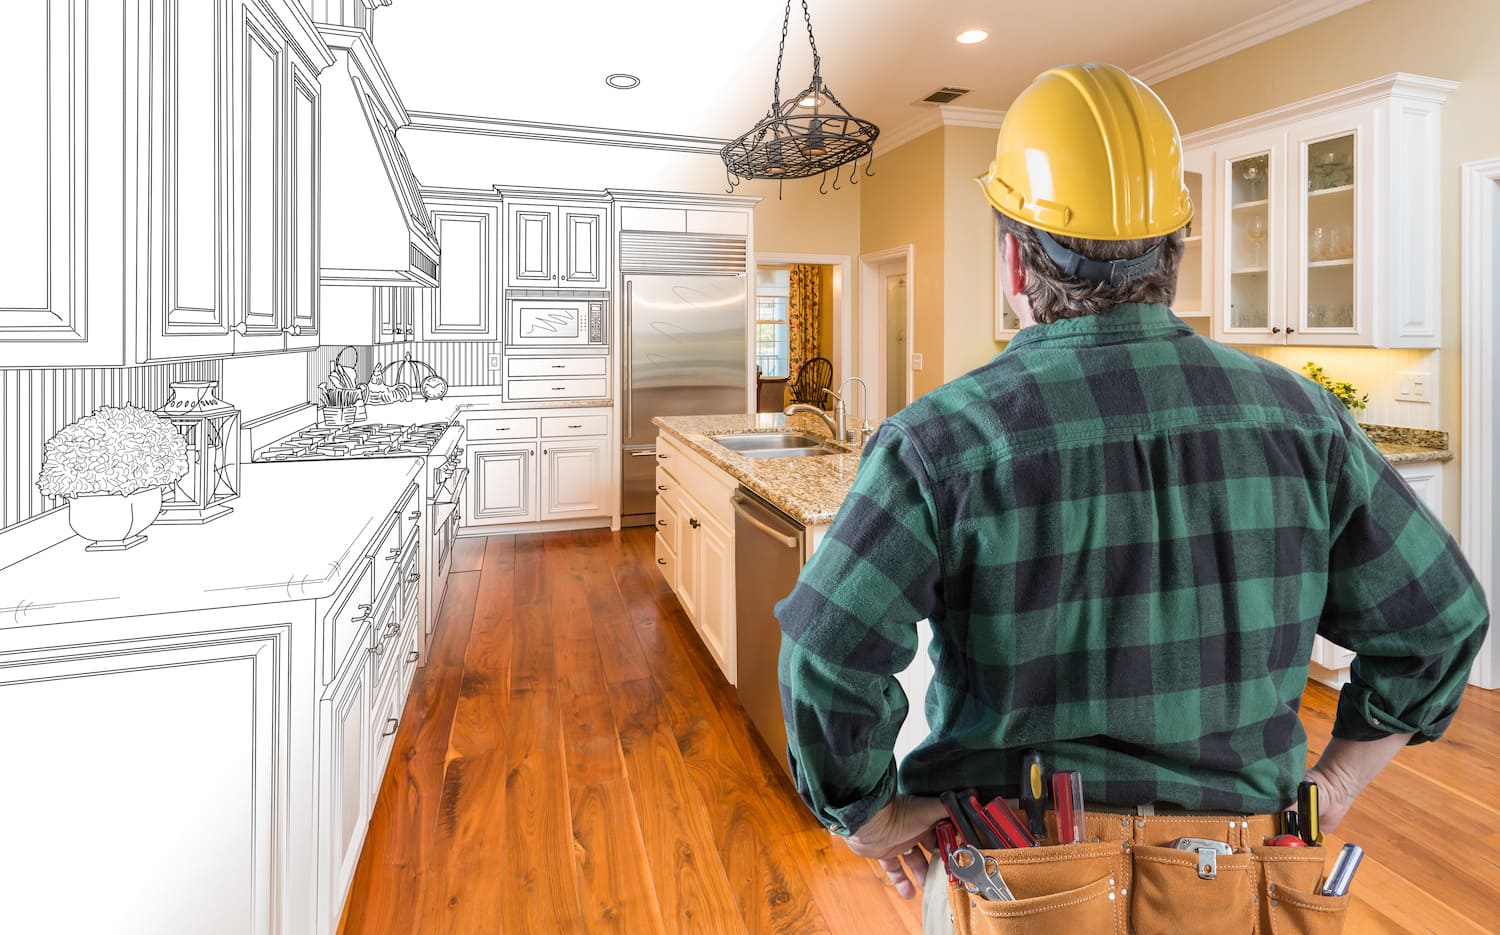 kitchen remodel contractors des moines contractor in hardhat envisioning a new kitchen design